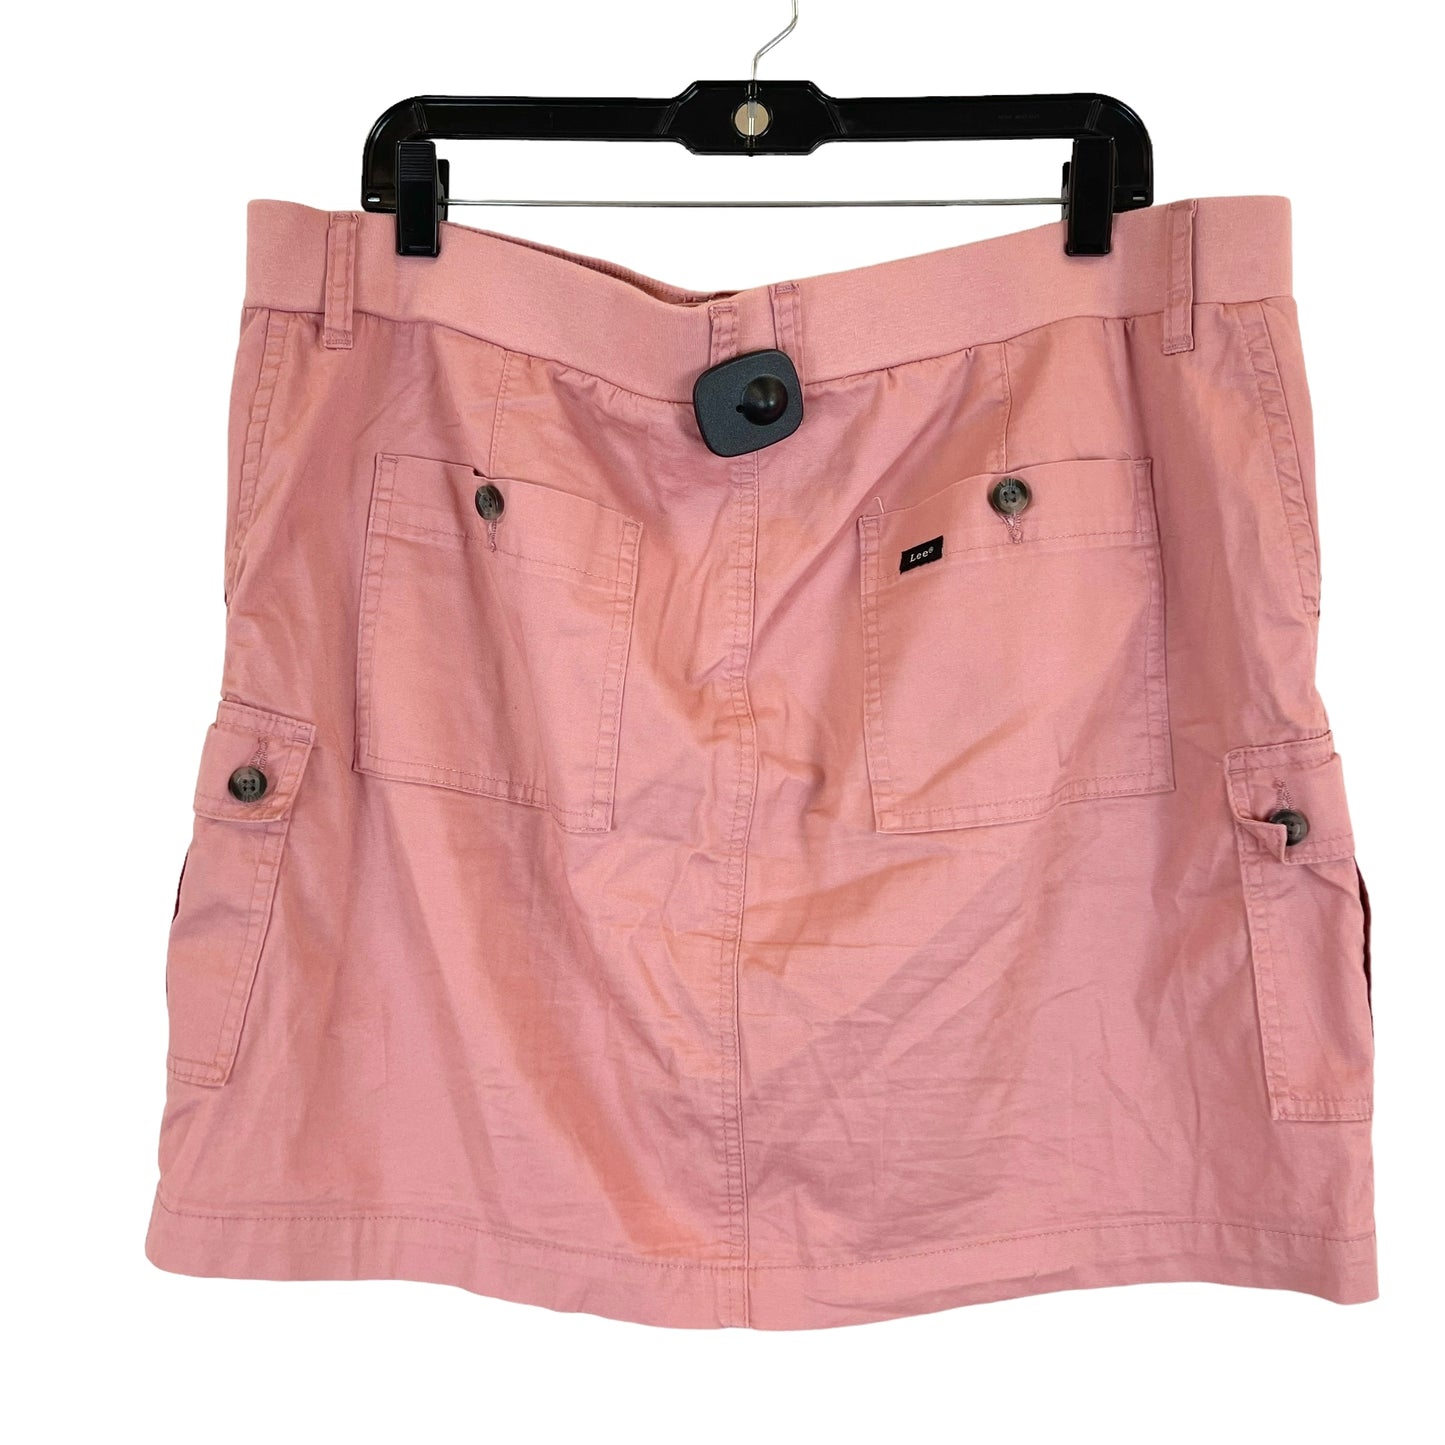 Skirt Mini & Short By Lee  Size: Xl